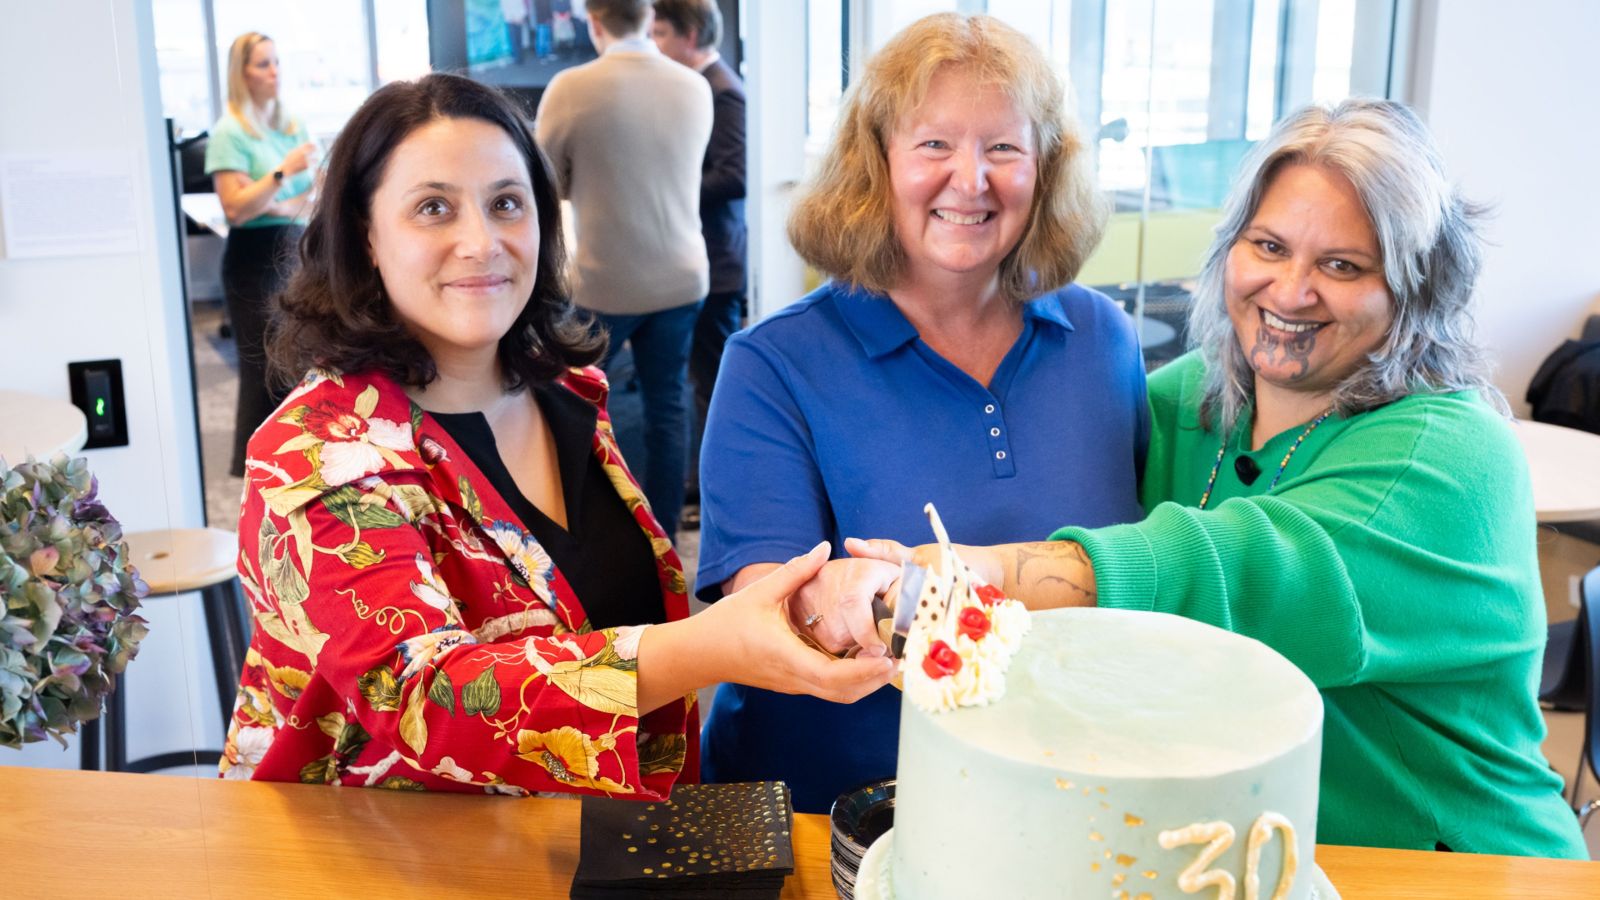 Kirsten Smiler, Jackie Cummings, and Lynne Russell cut the celebratory cake at the thirtieth party